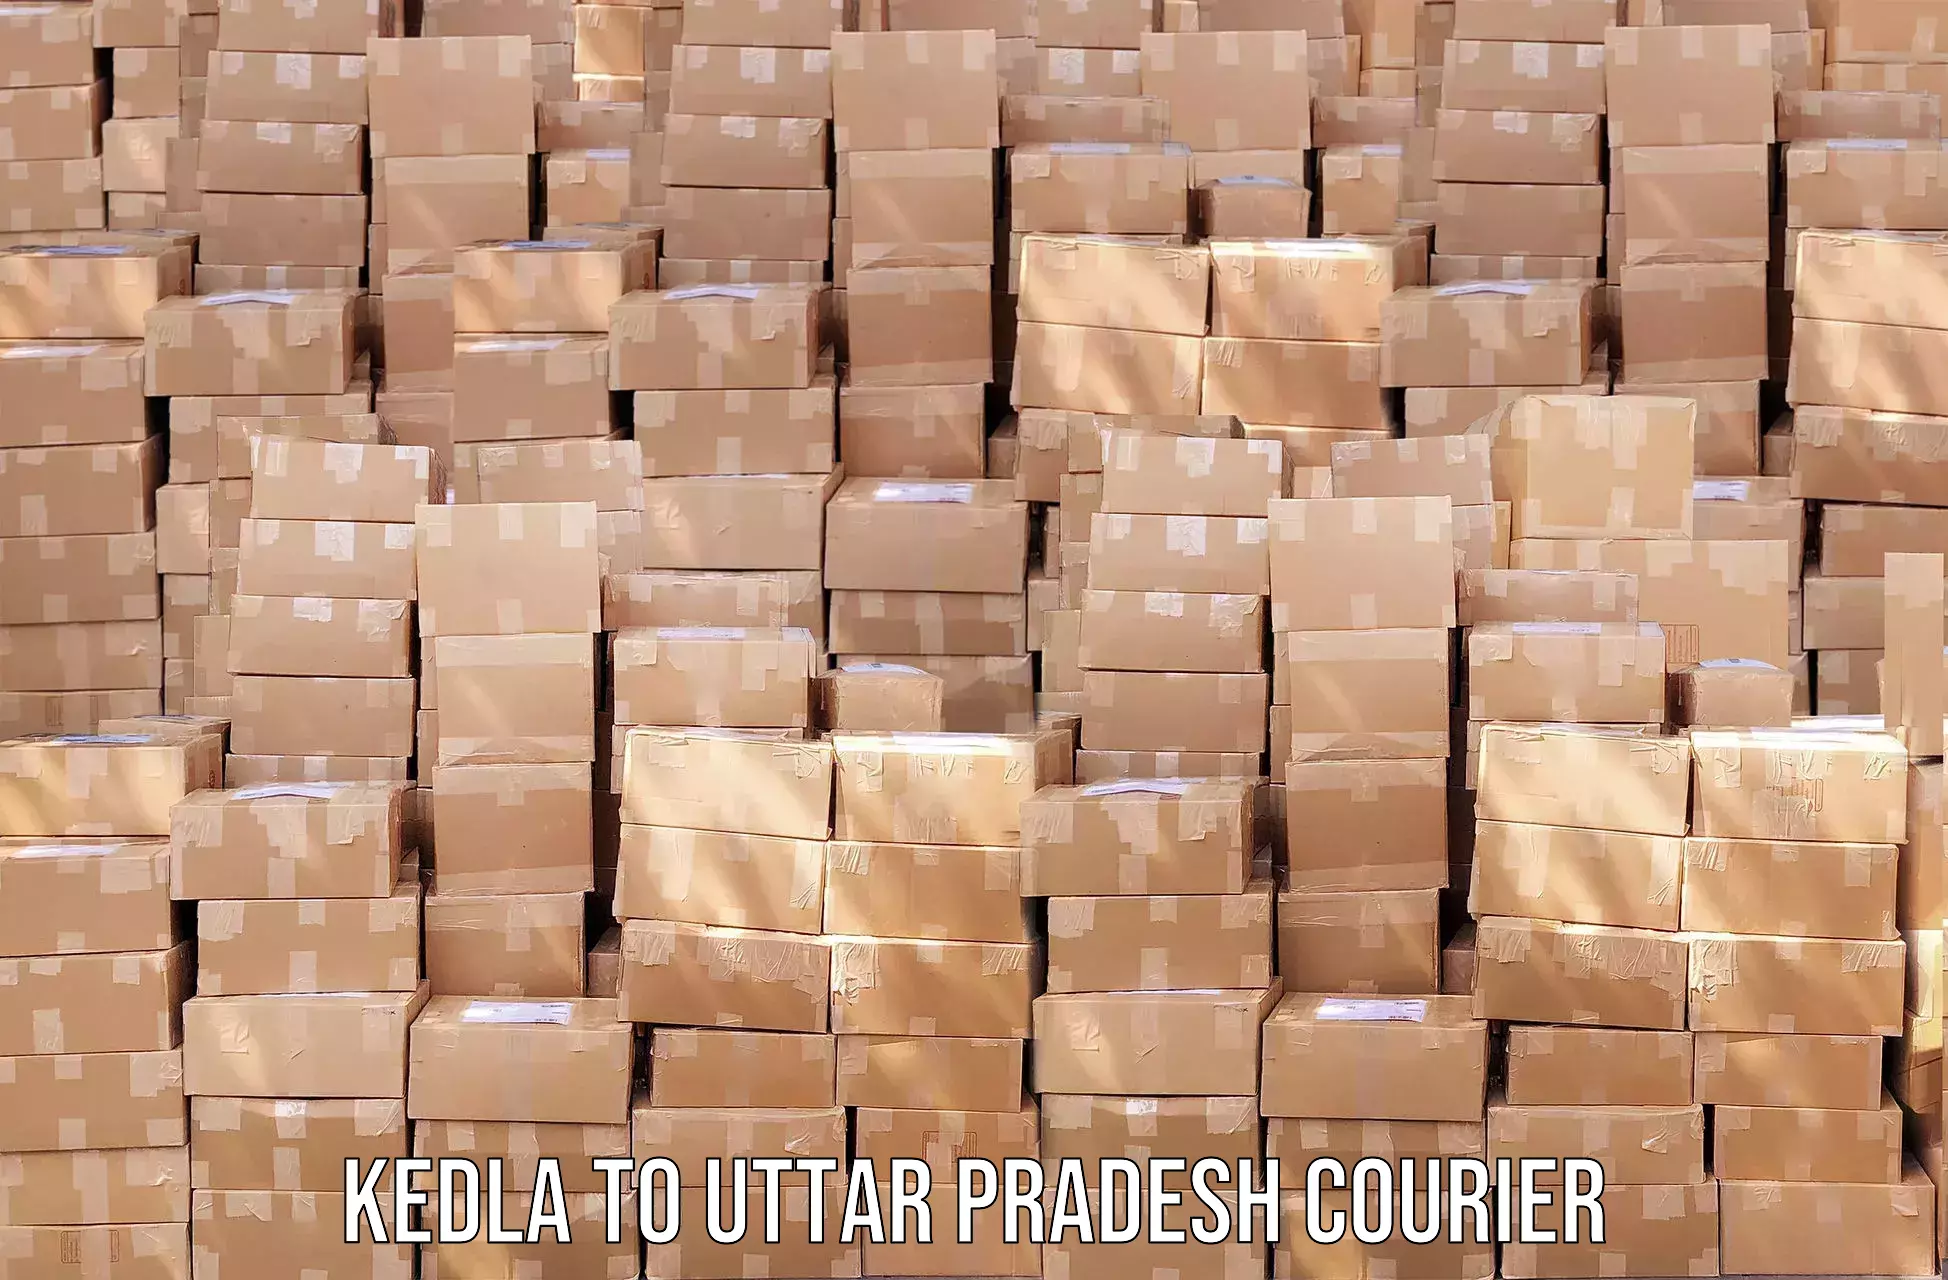 Easy access courier services Kedla to Ayodhya